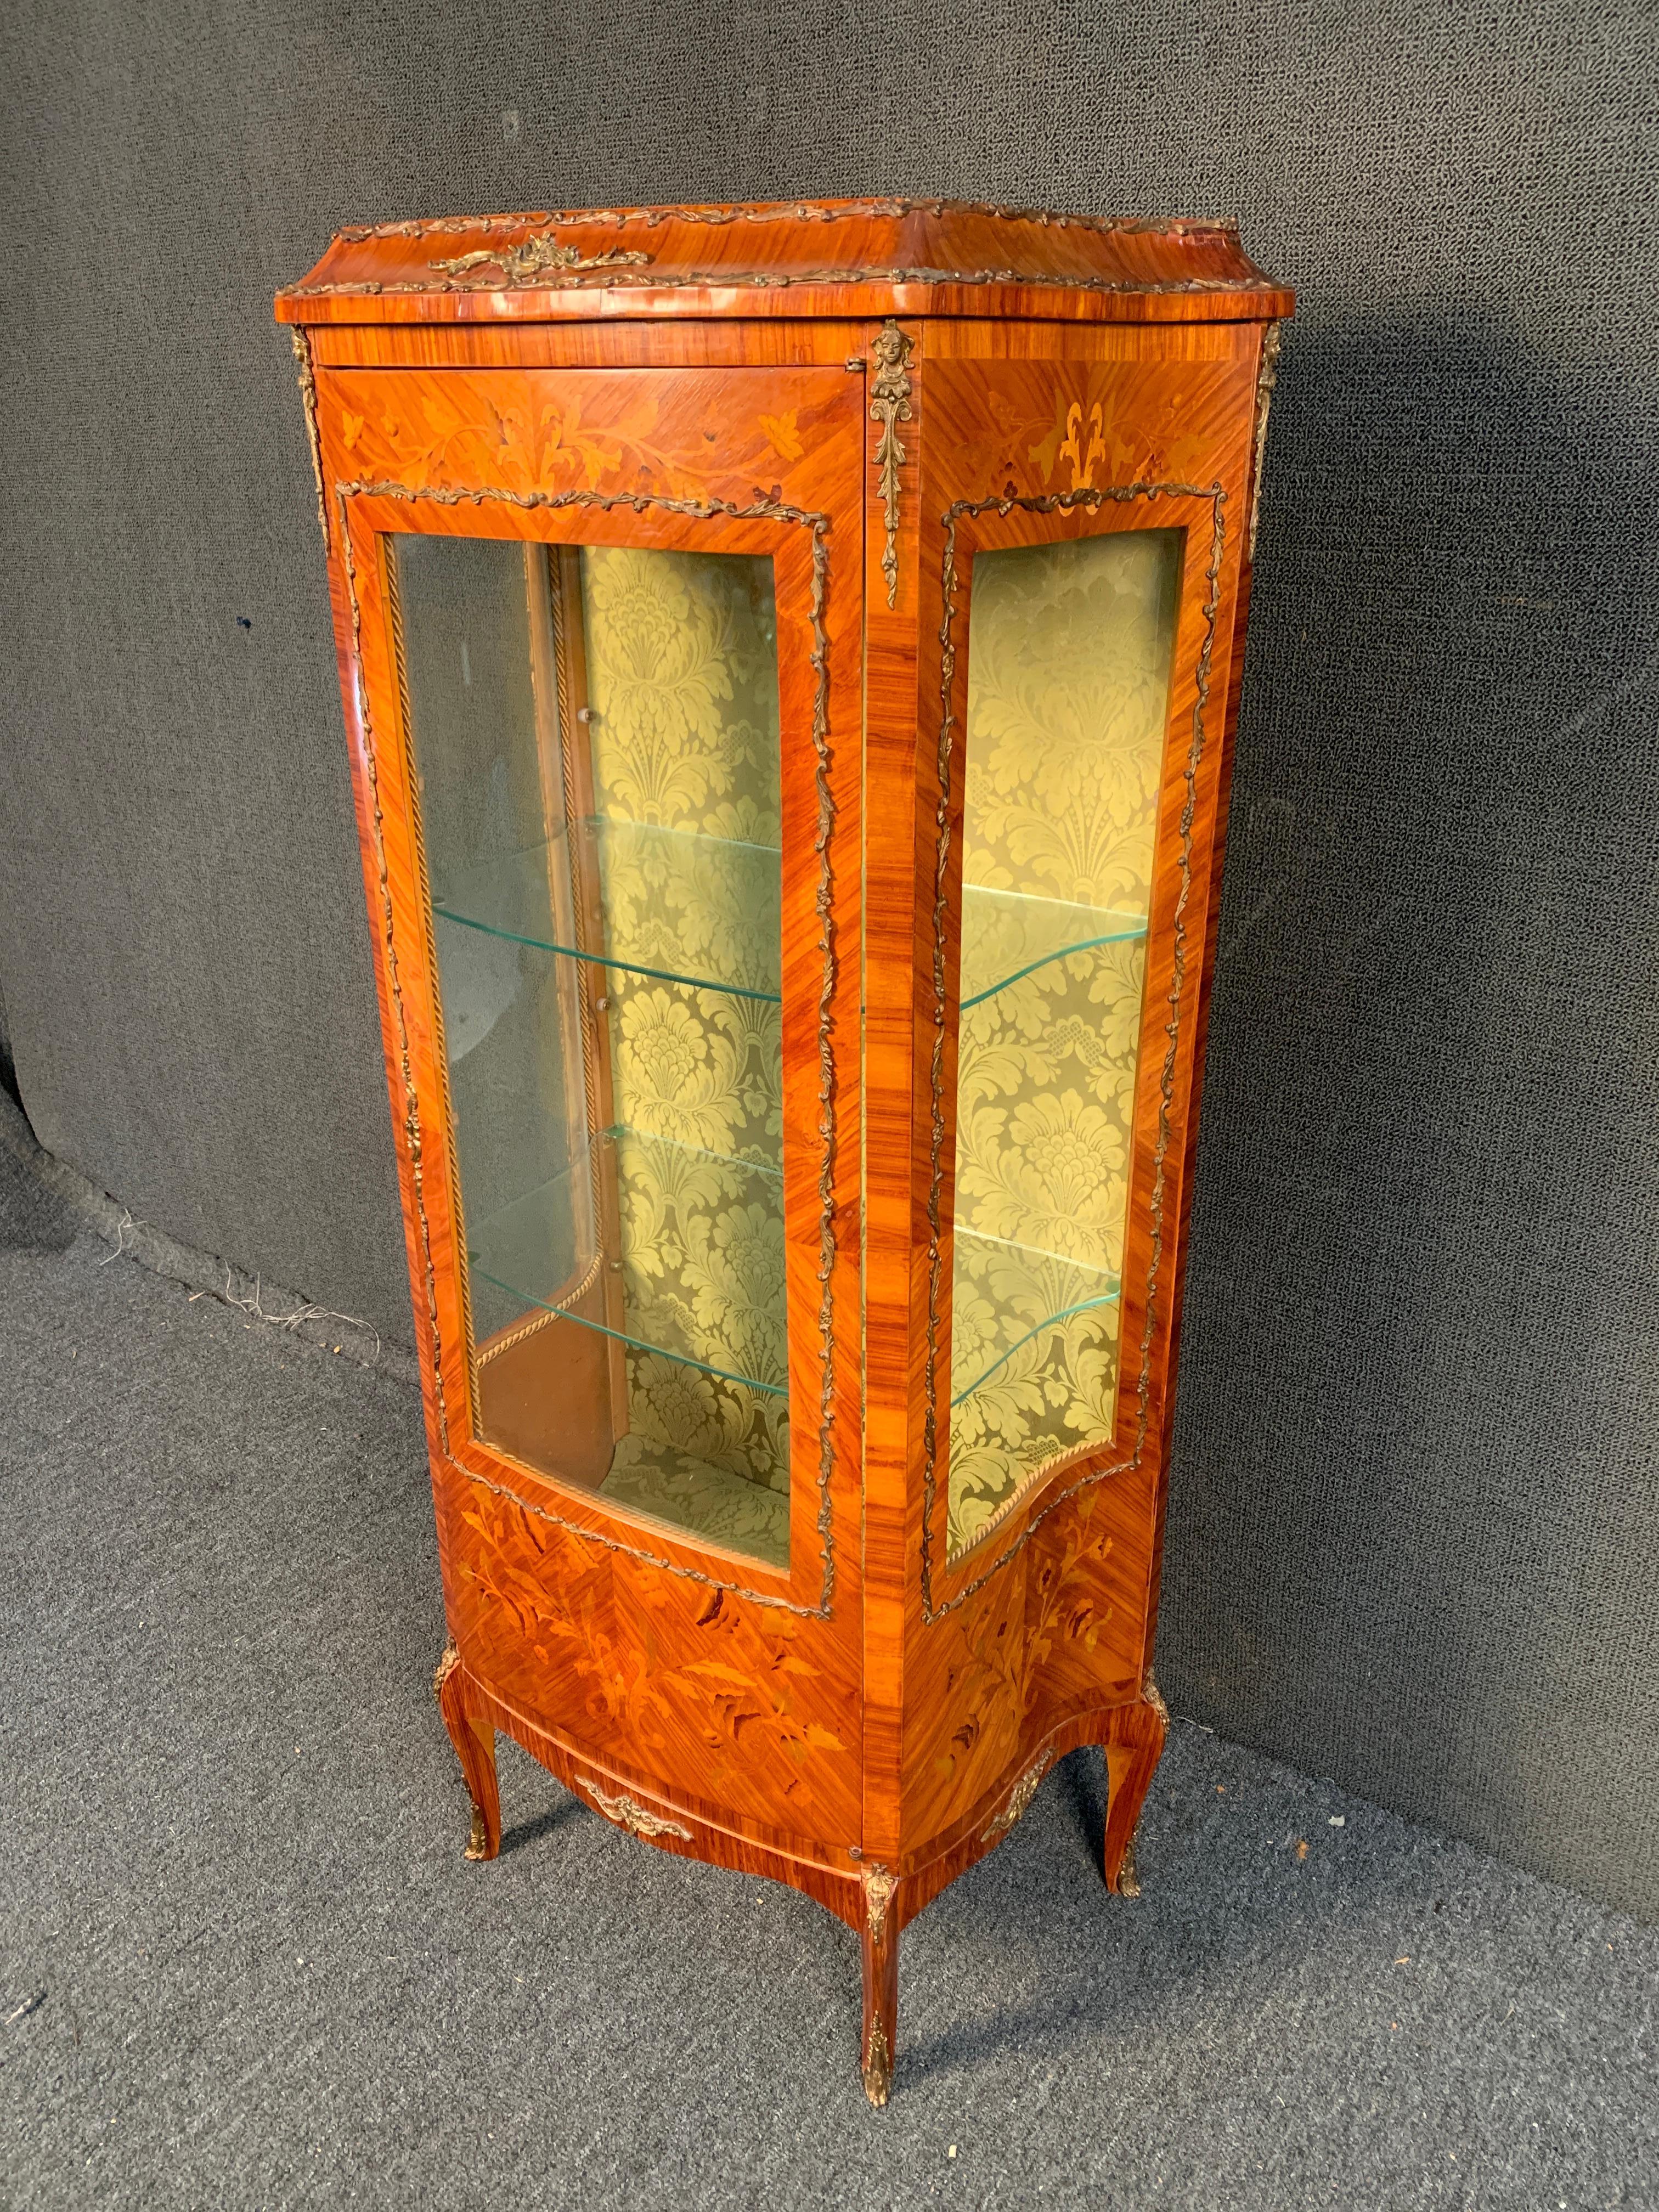 For your consideration a exquisite late 19th century French Louis XVI style kingwood vitrine featuring gilded ormolu accent mounts, shaped glass front panels and glass shelving , lined floral fabric within, foliate marquetry inlay to the door